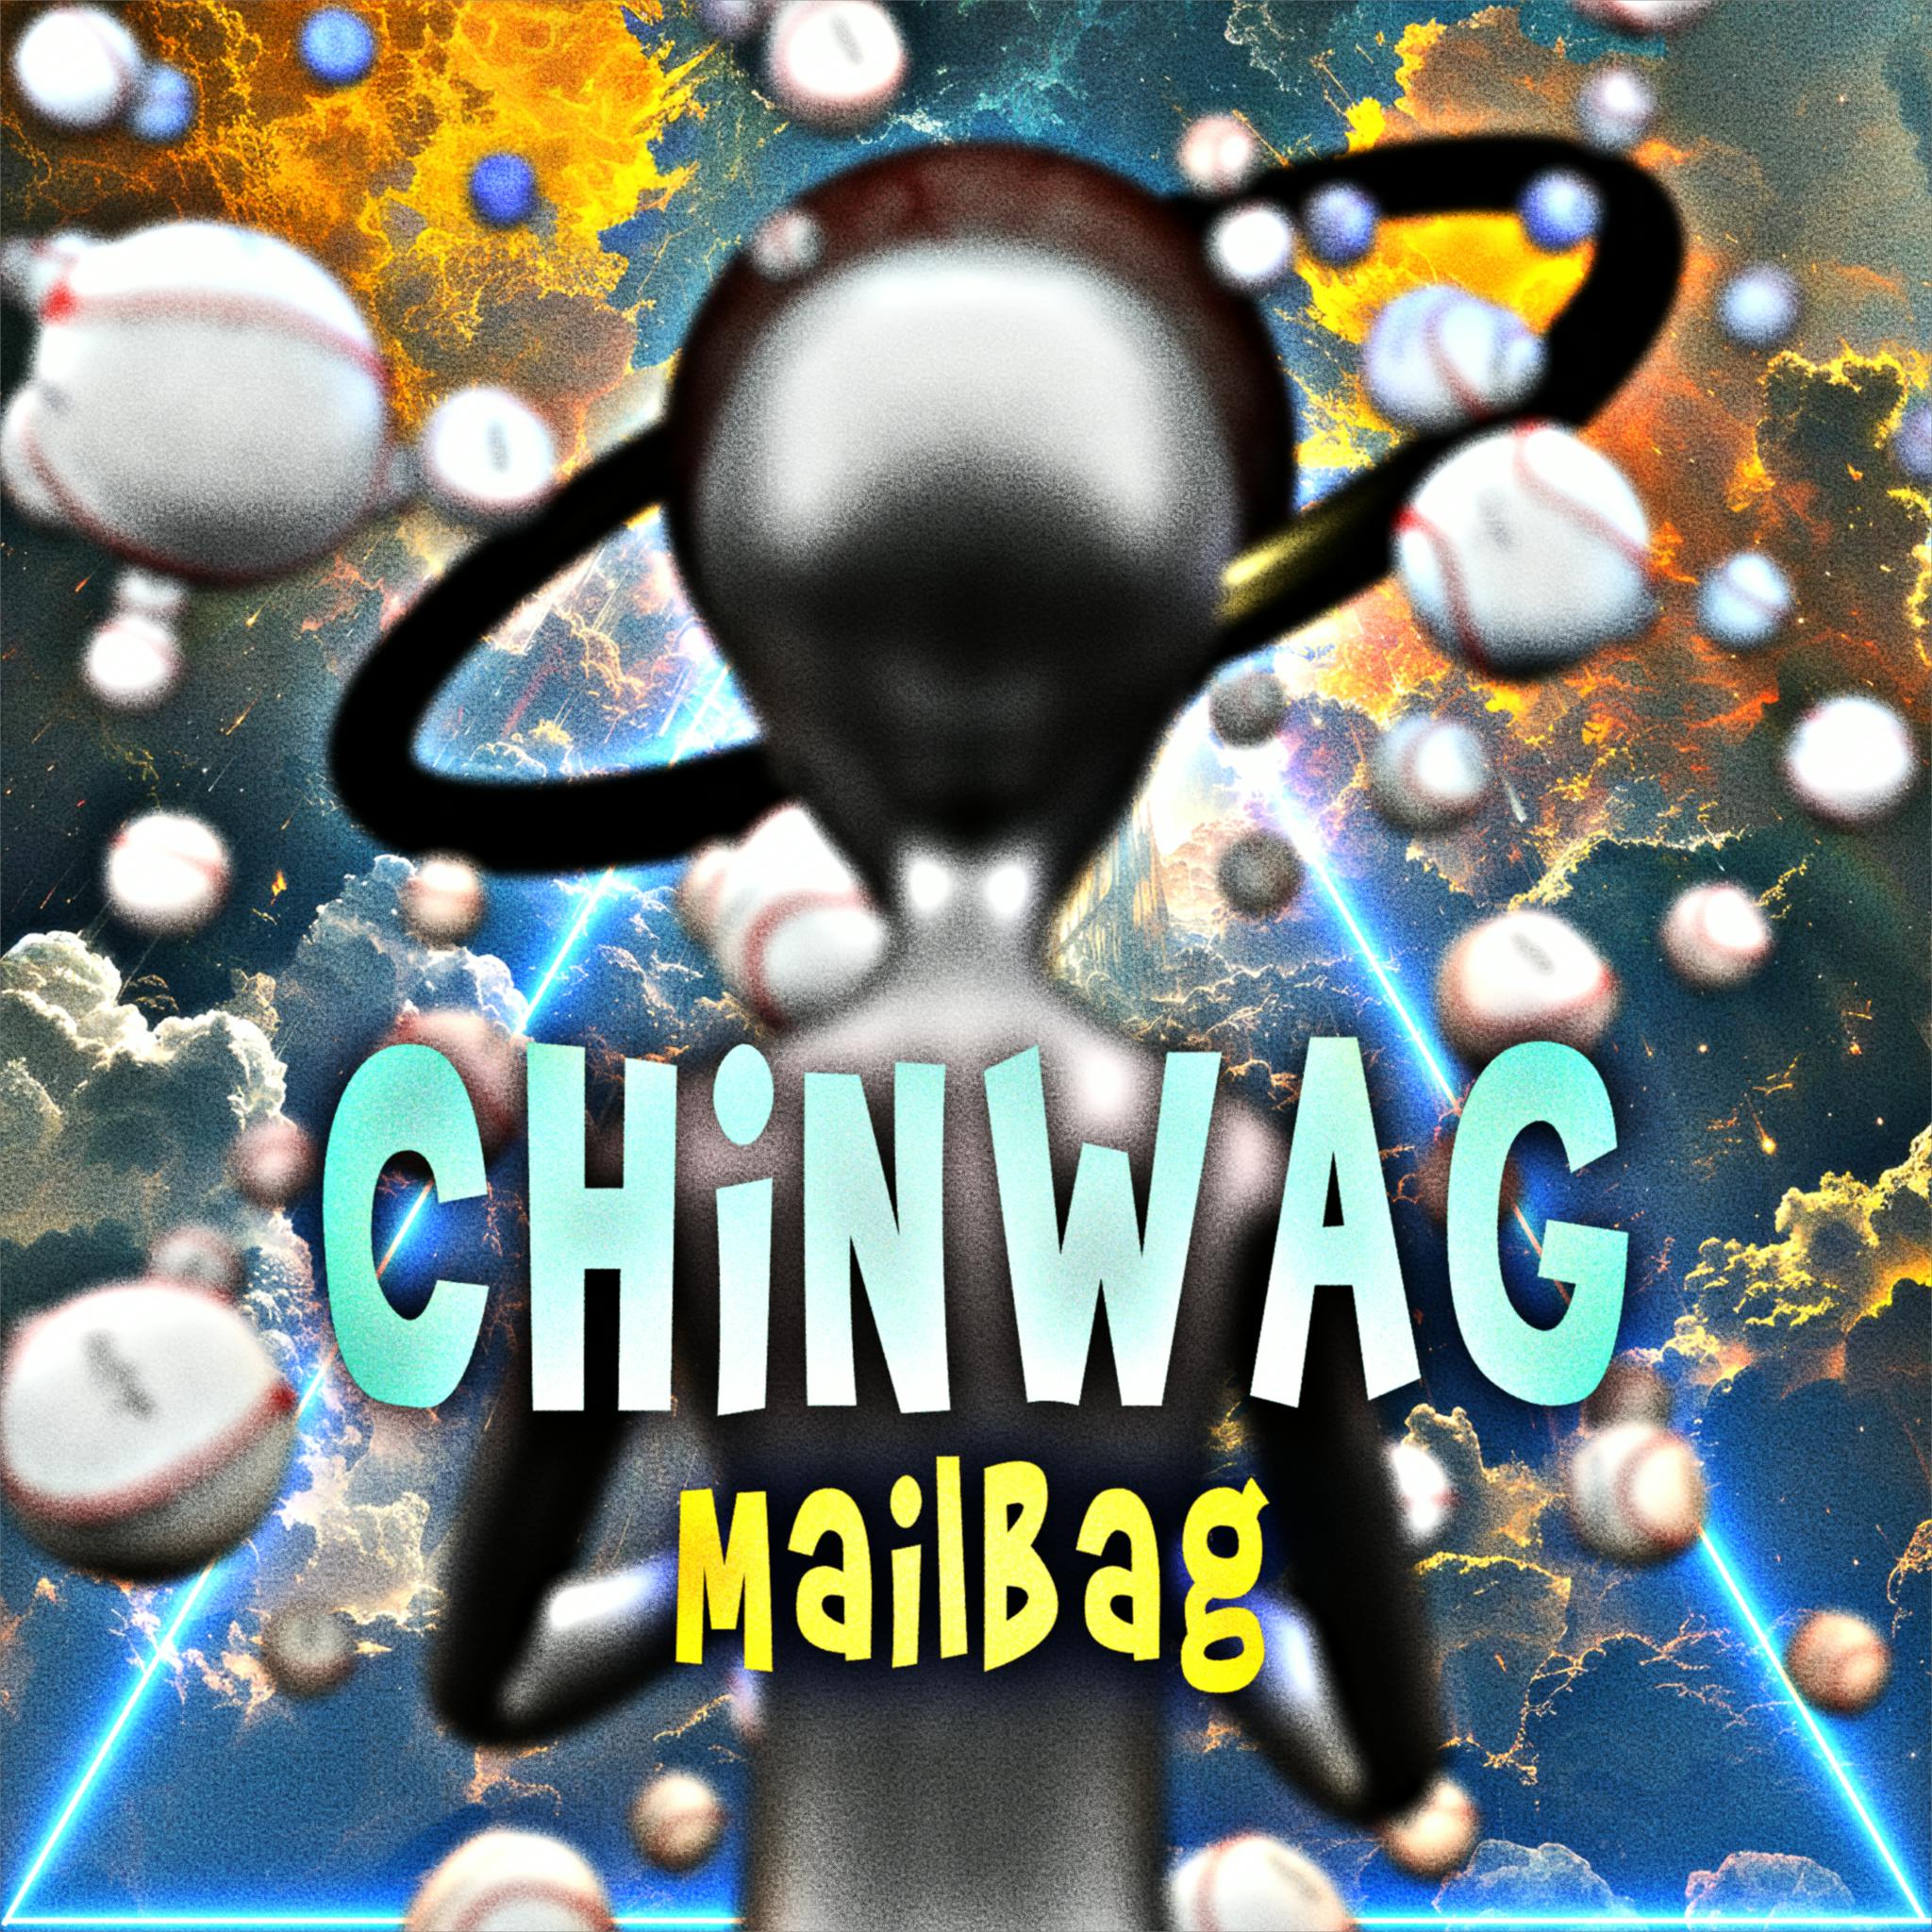 Chinwag Mailbag: A Ghostly Life After Near-Death